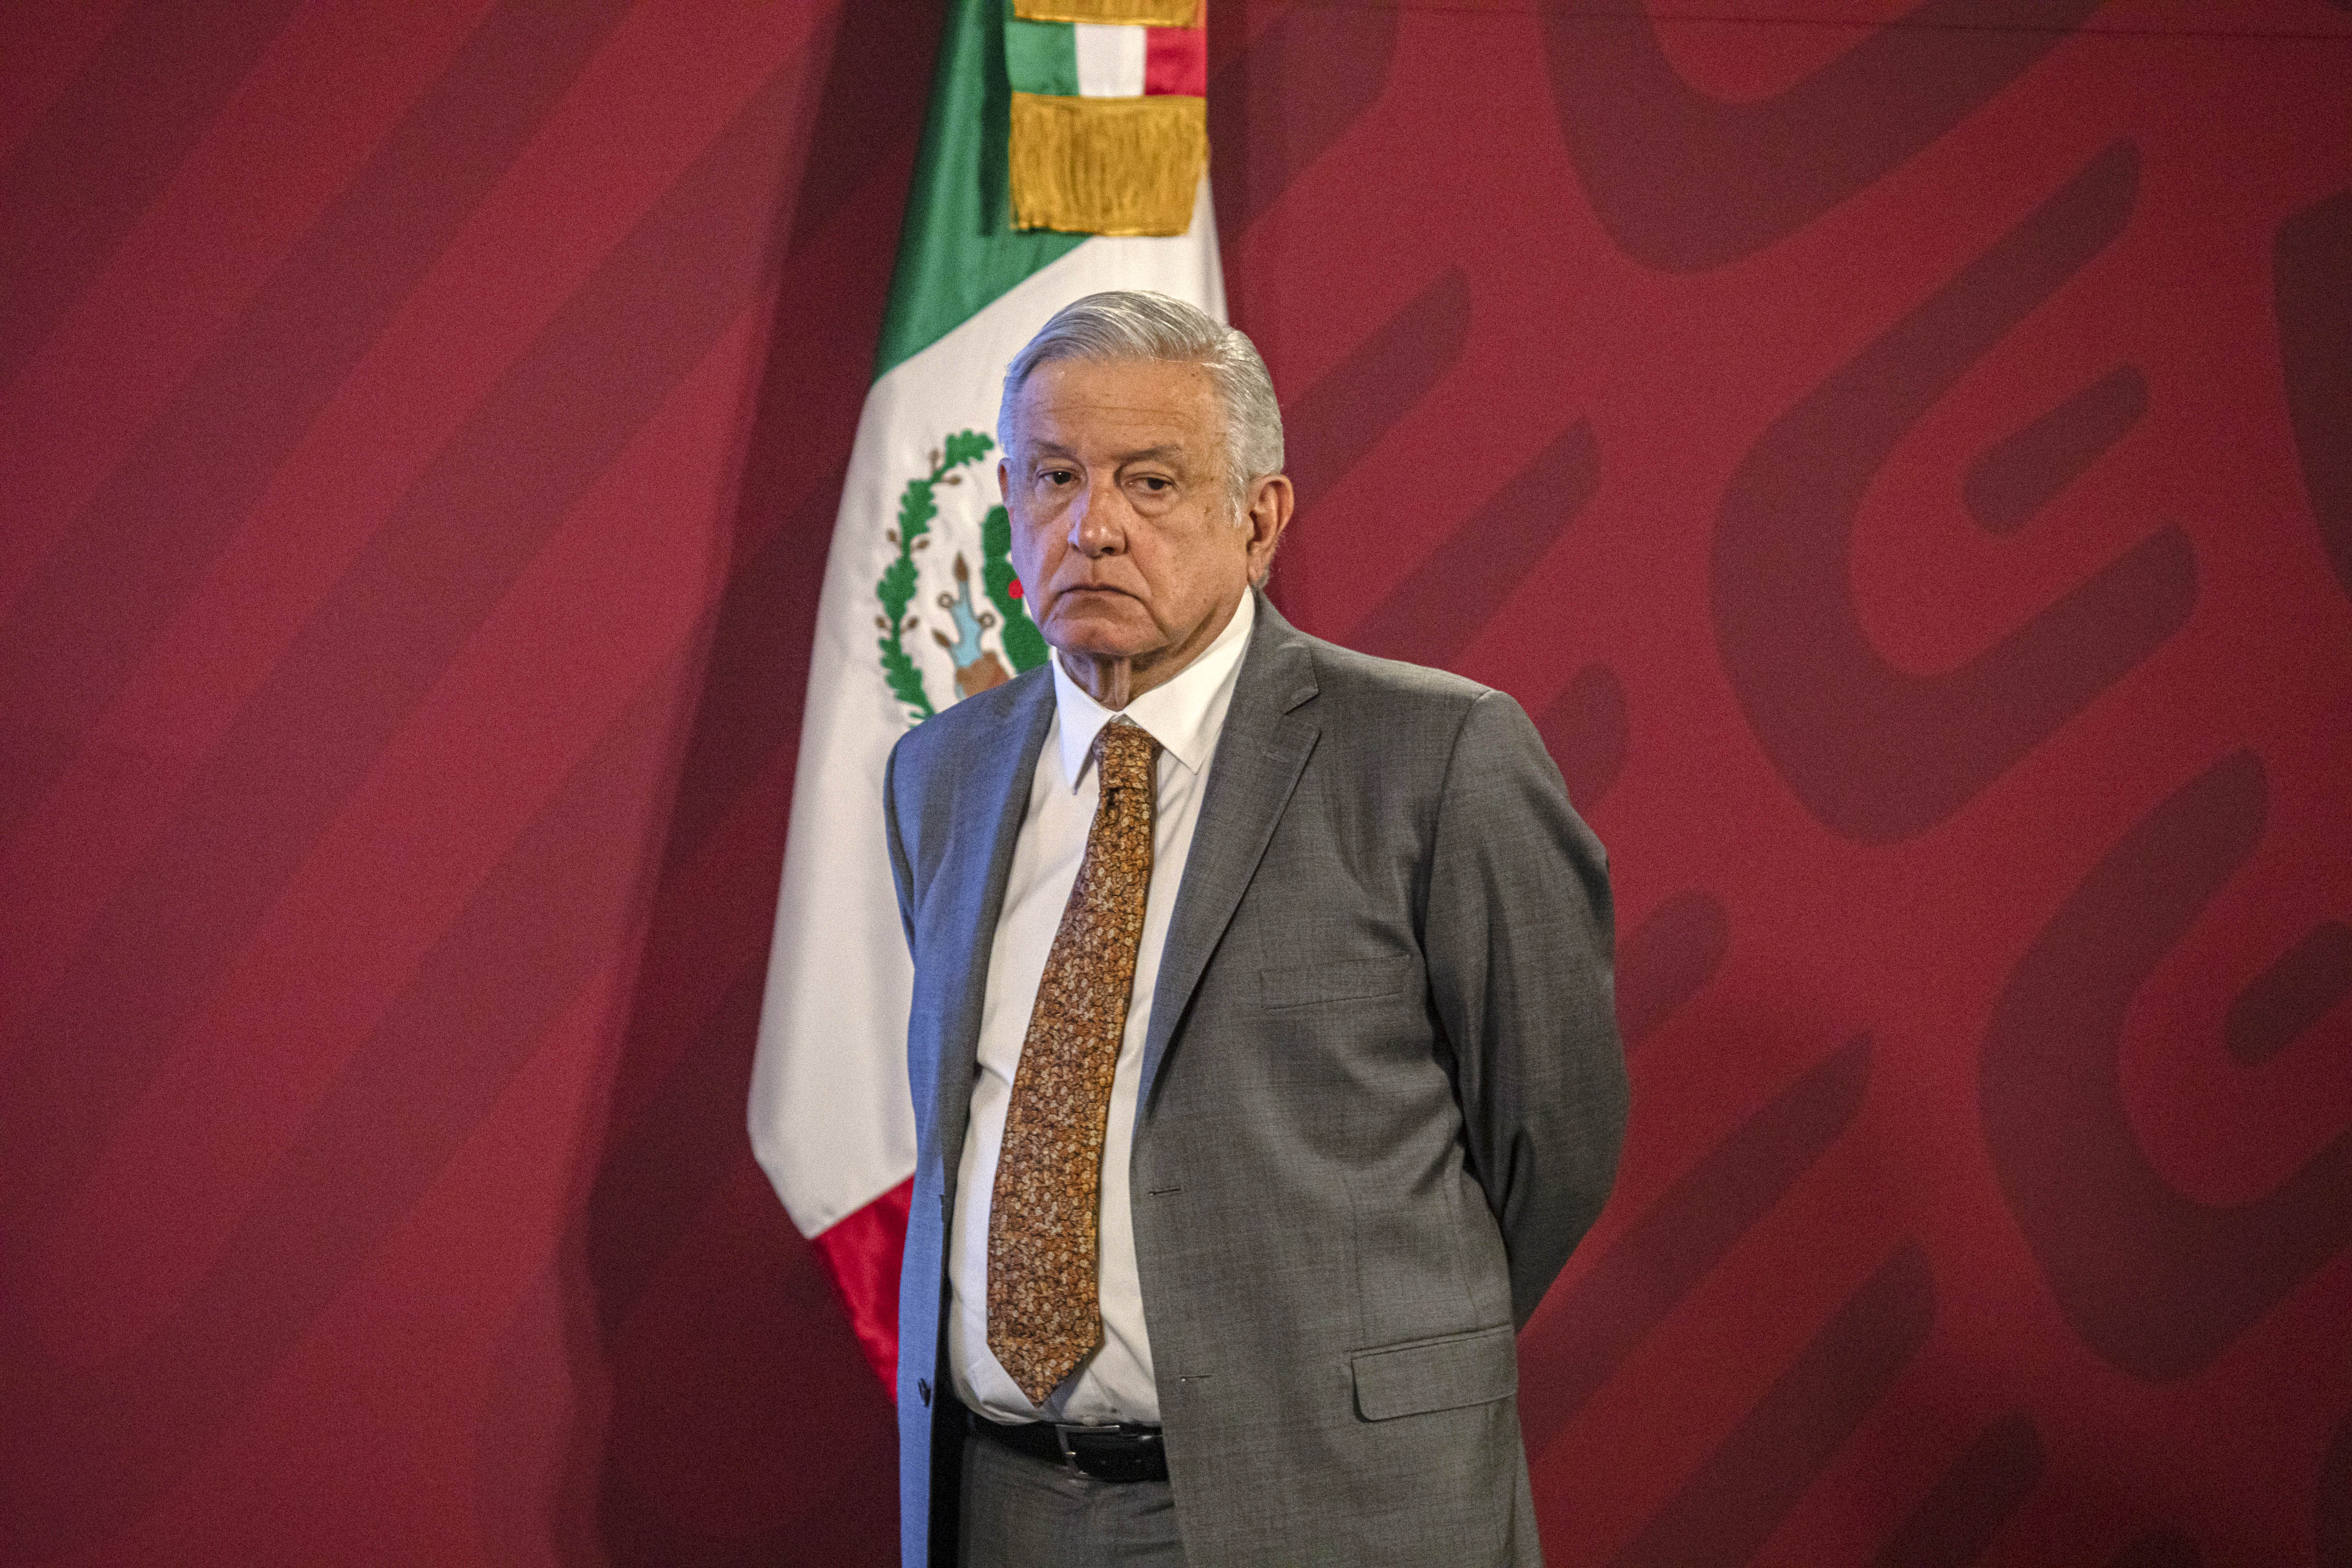 Andrés Manuel López Obrador, Mexico's president, stands during a news conference in Mexico City on June 23.